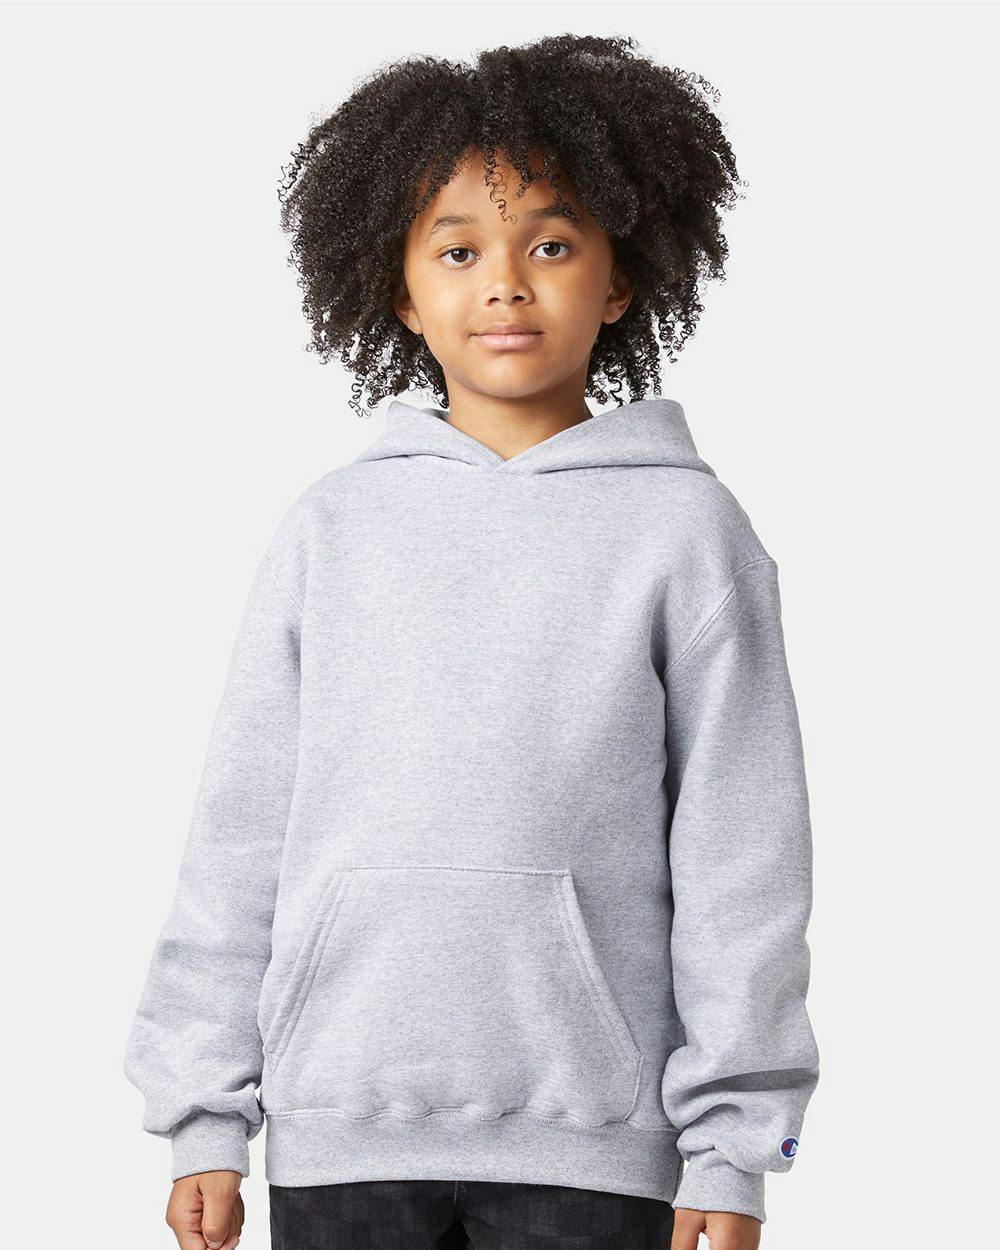 Image for Powerblend® Youth Hooded Sweatshirt - S790